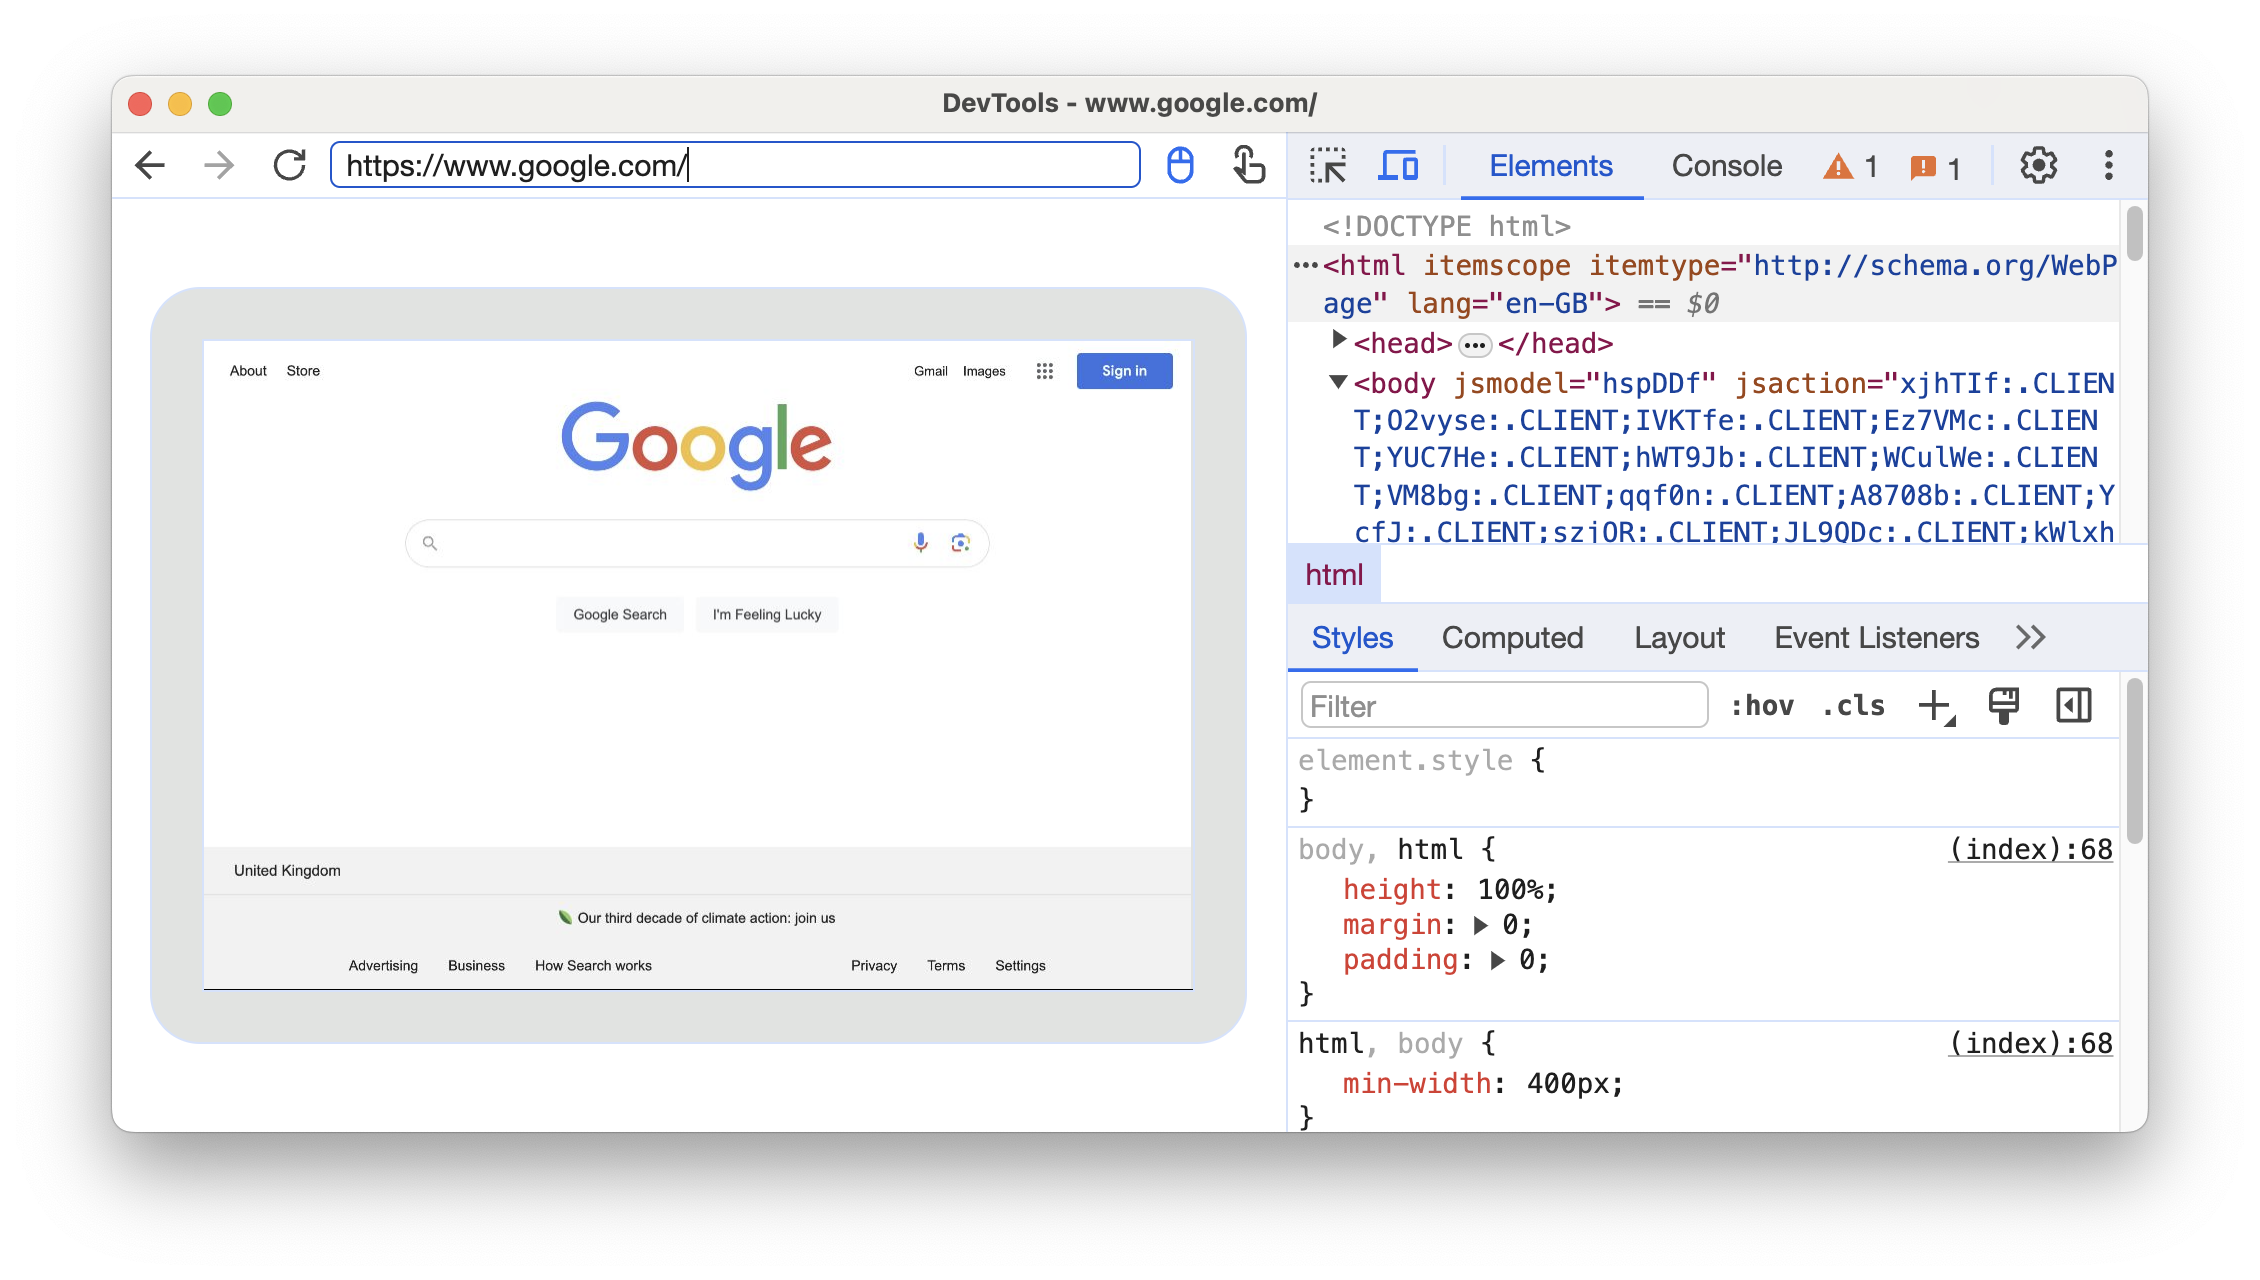 DevTools in device mode.